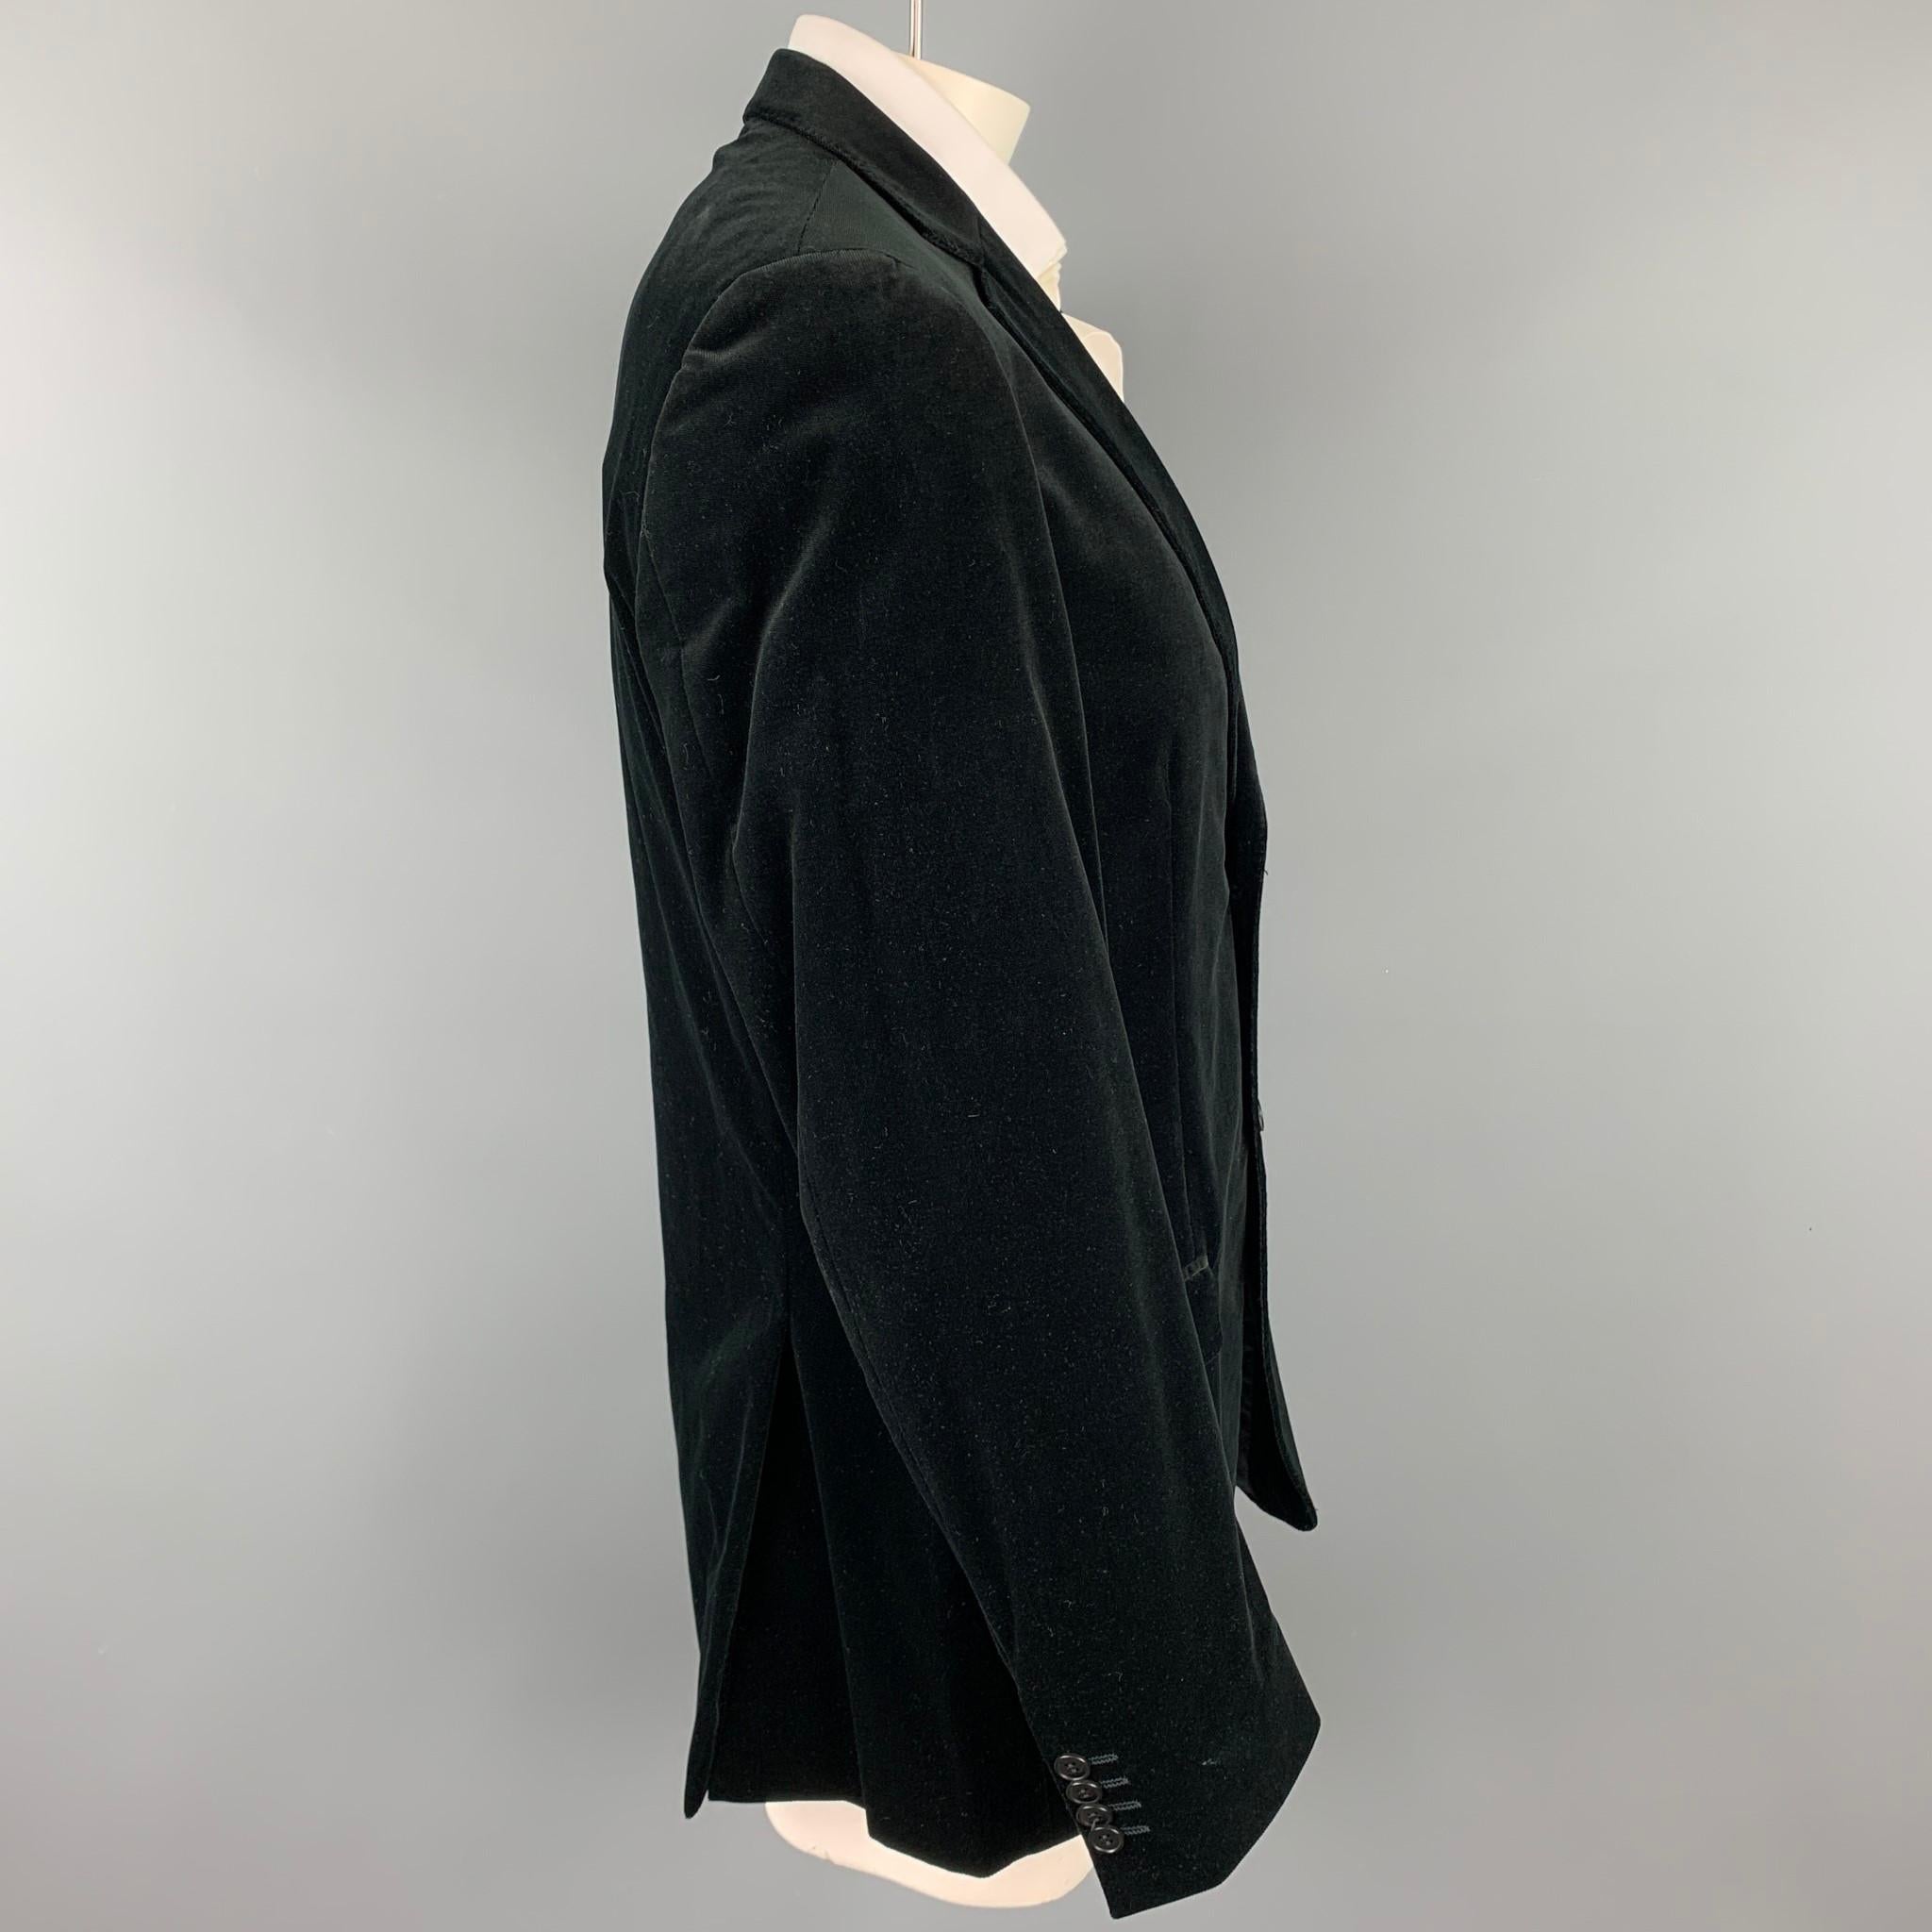 Z ZEGNA sport coat comes in a black cotton velvet with a full liner featuring a notch lapel, flap pockets, and a two button closure.

Very Good Pre-Owned Condition.
Marked: 54 L

Measurements:

Shoulder: 19 in.
Chest: 44 in.
Sleeve: 27.5 in.
Length: